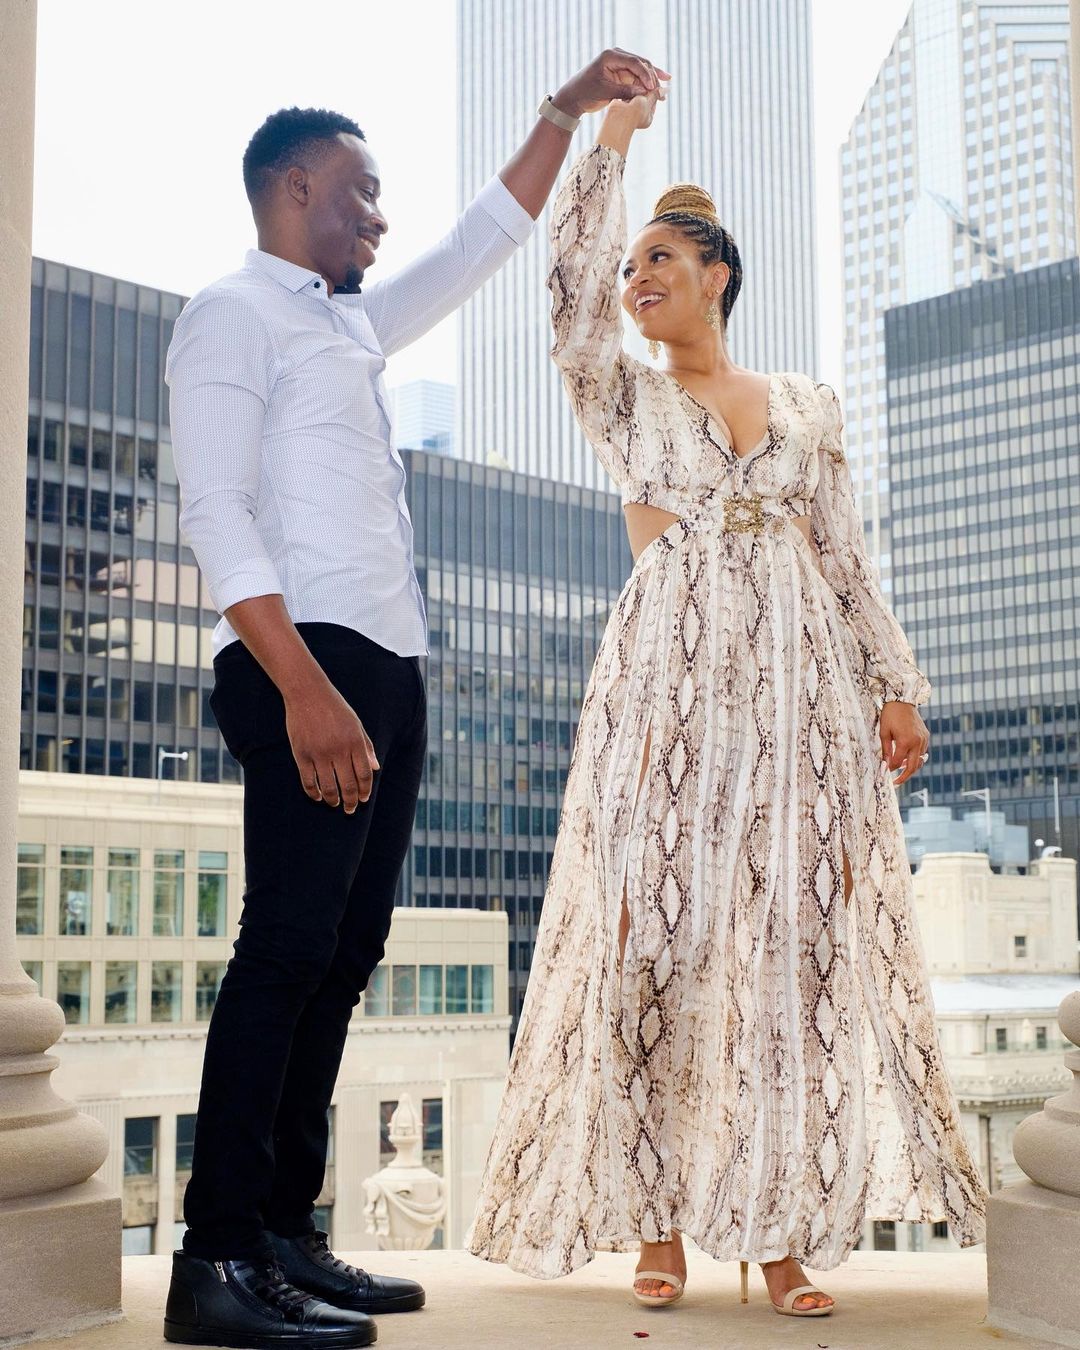 Taara and Michael’s Surprise Rooftop Proposal in Chicago